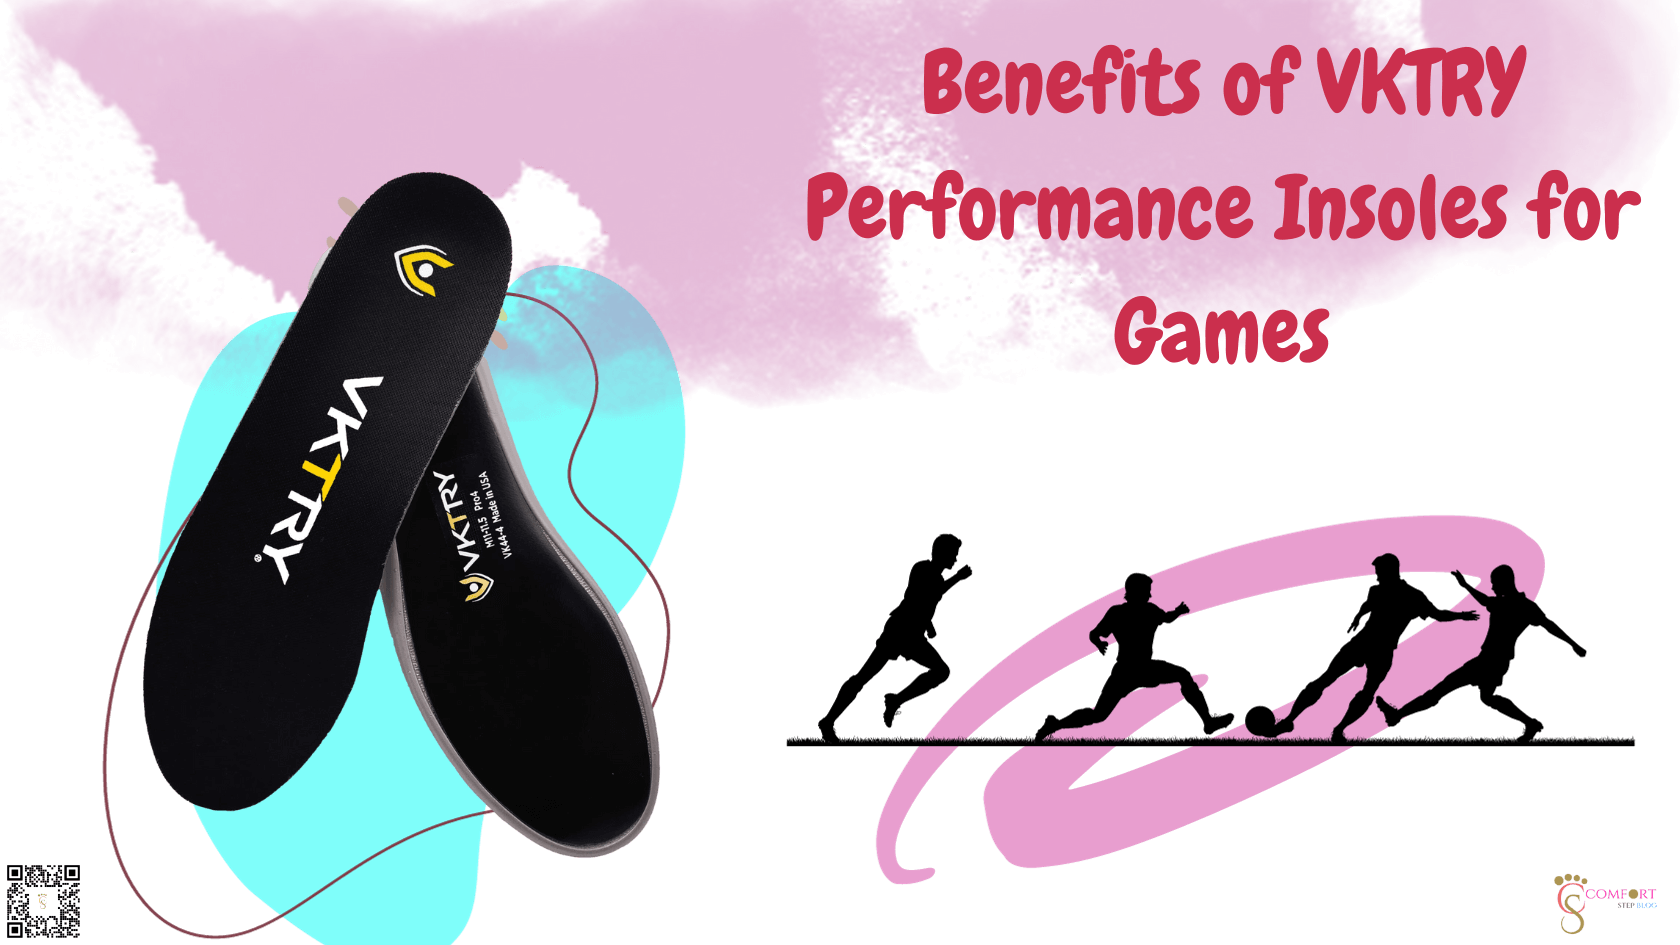 Benefits of VKTRY Performance Insoles for Games